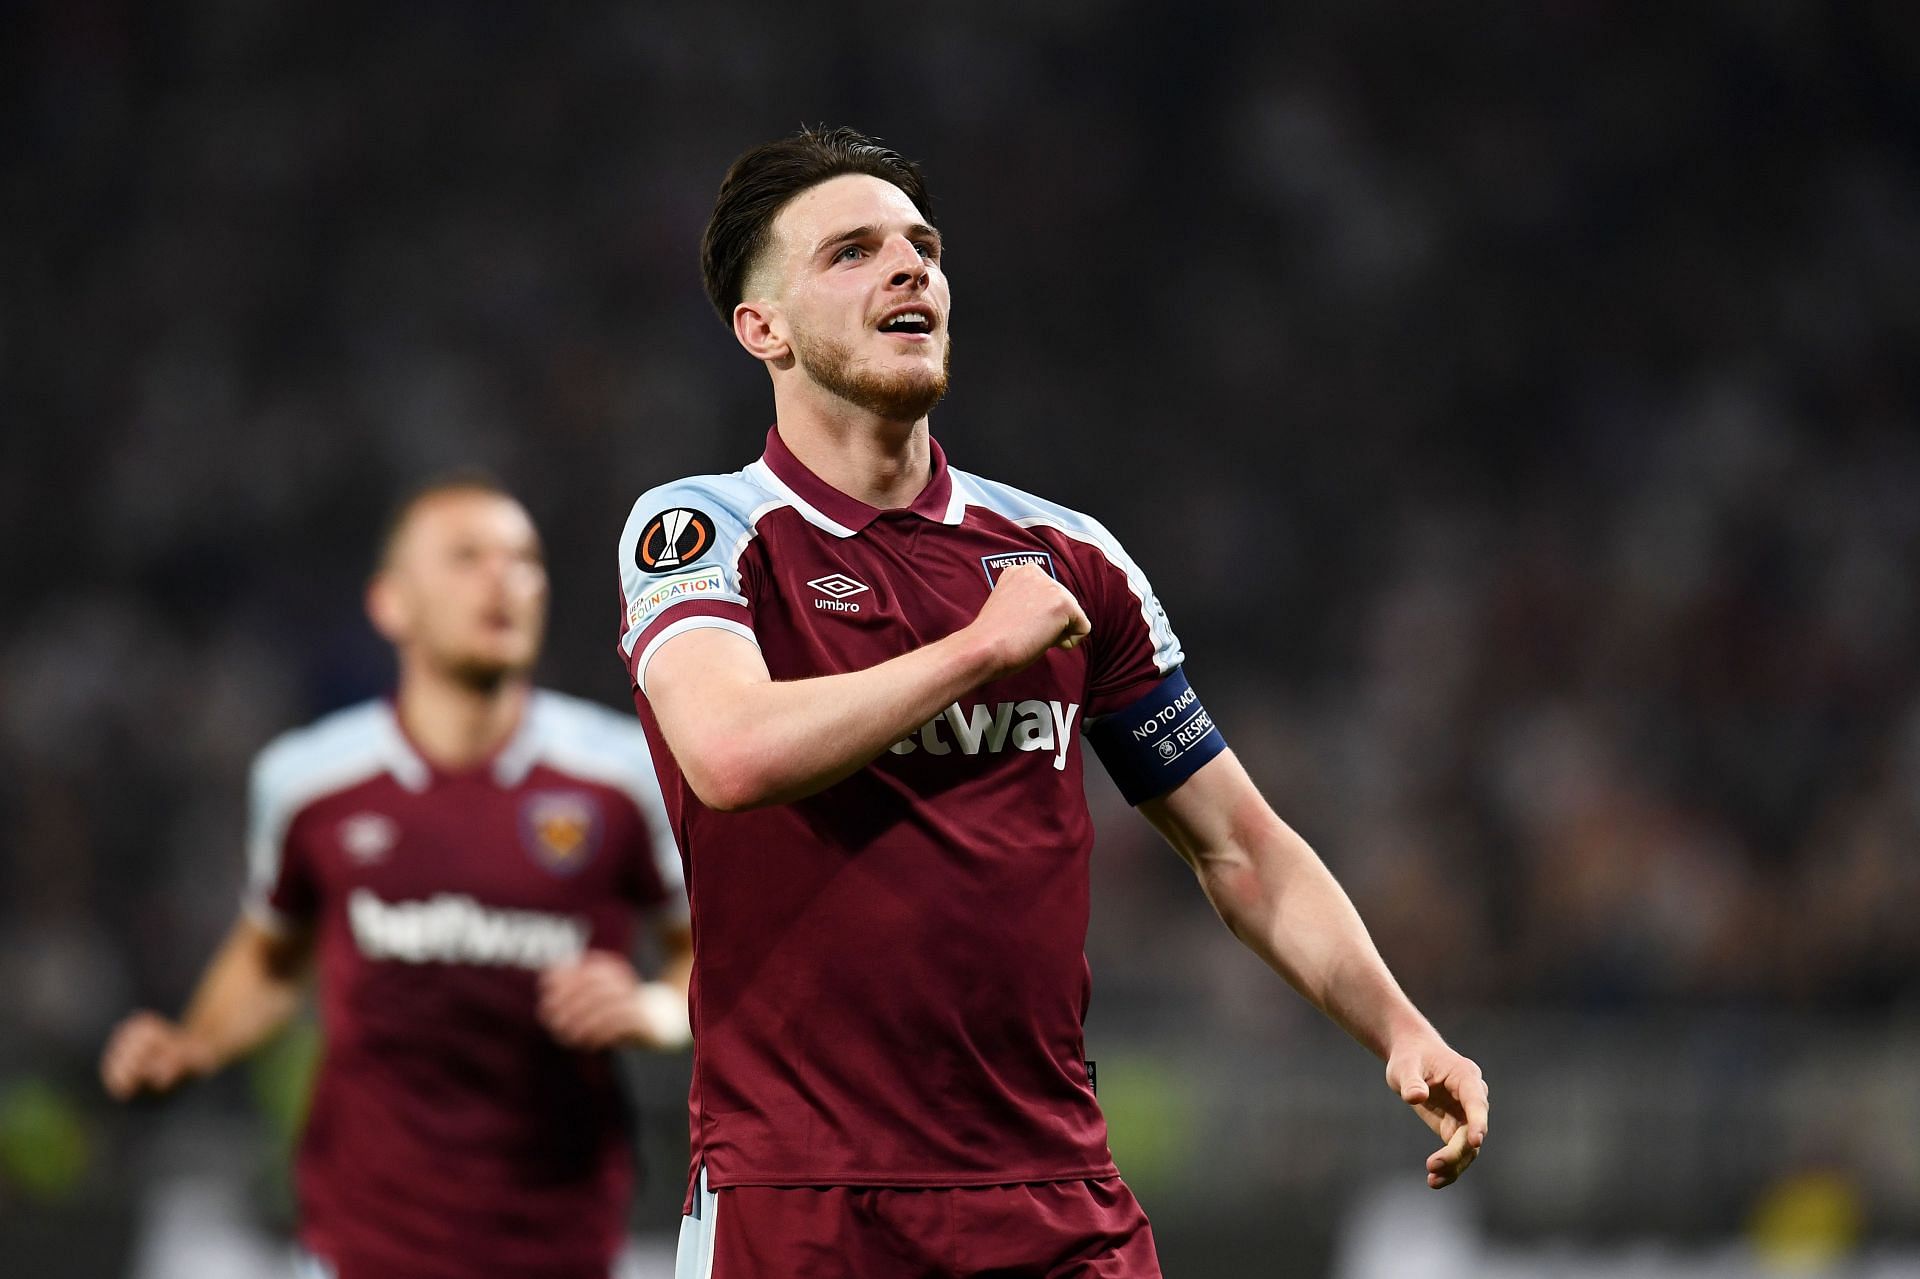 Manchester United and a host of other European clubs are interested in signing Declan Rice